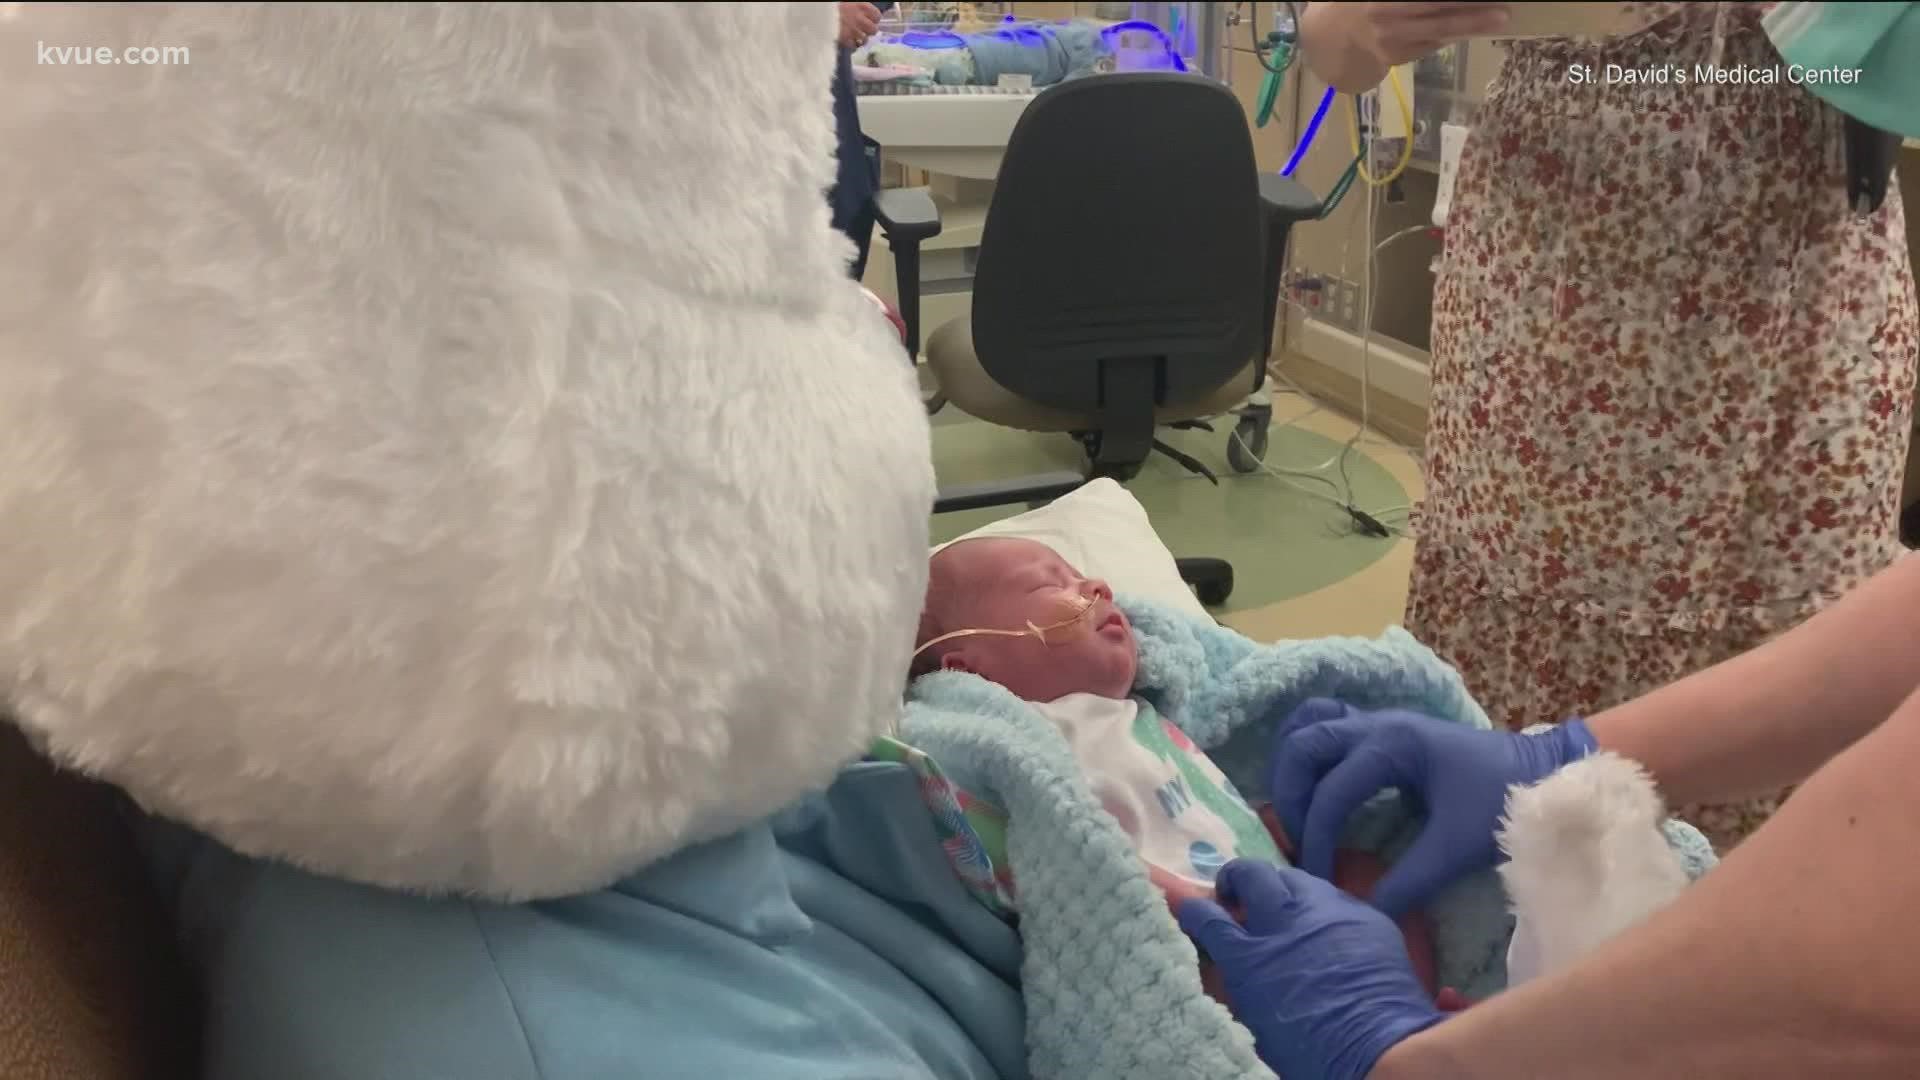 The Easter Bunny made an early trip to St. David's Round Rock Medical Center to visit patients in the NICU.